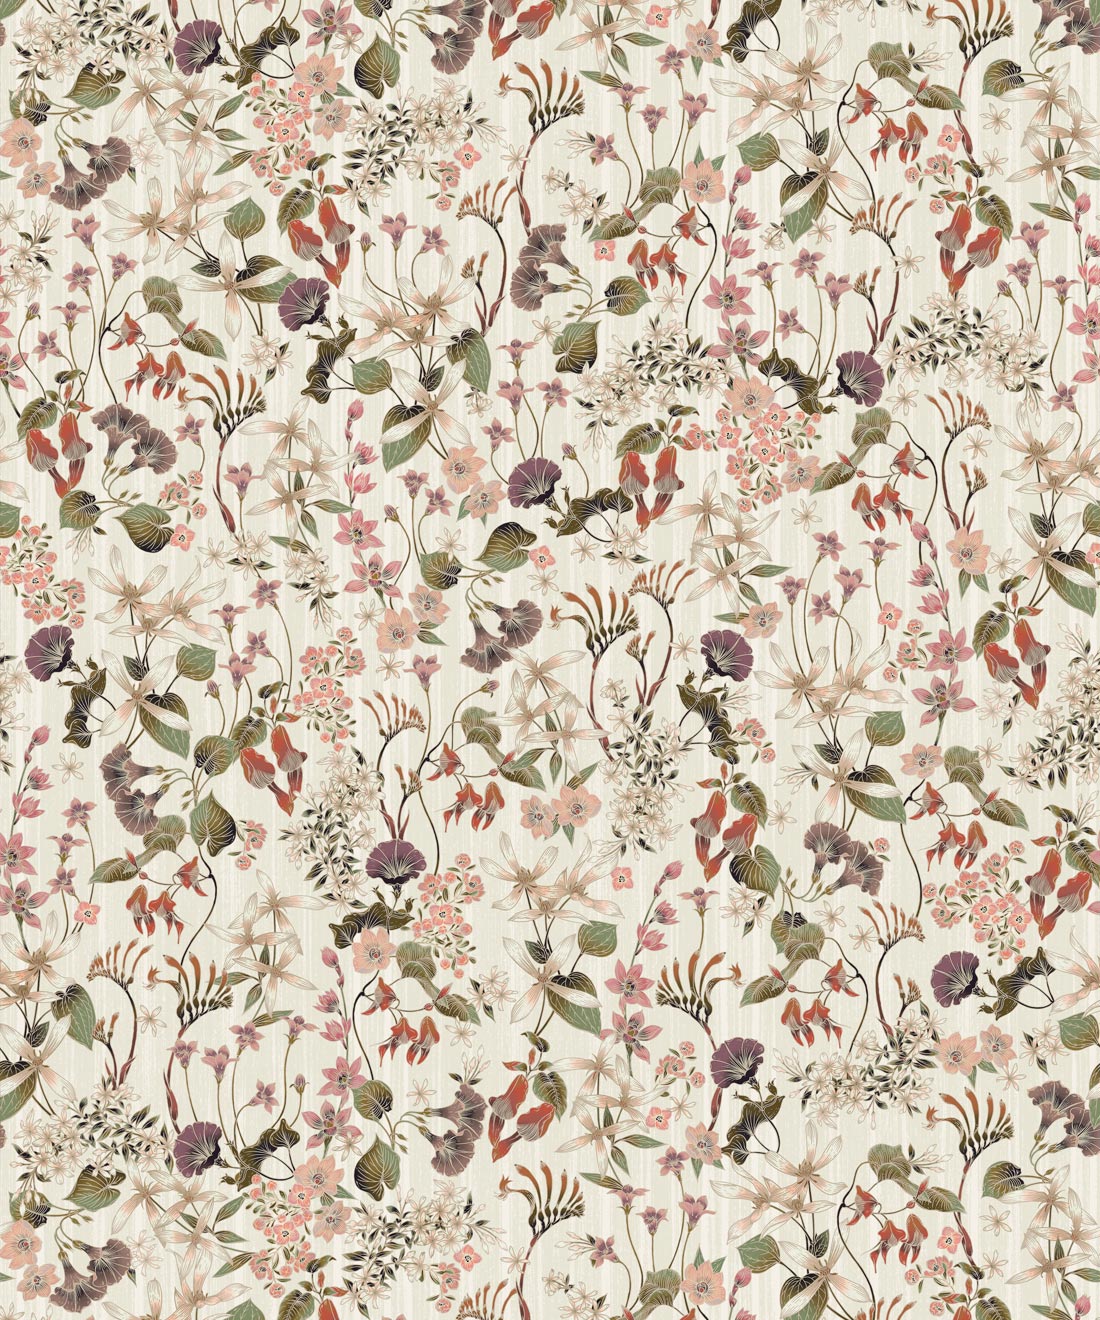 County Flowers Wallpaper • Vintage Floral Wallpaper USA